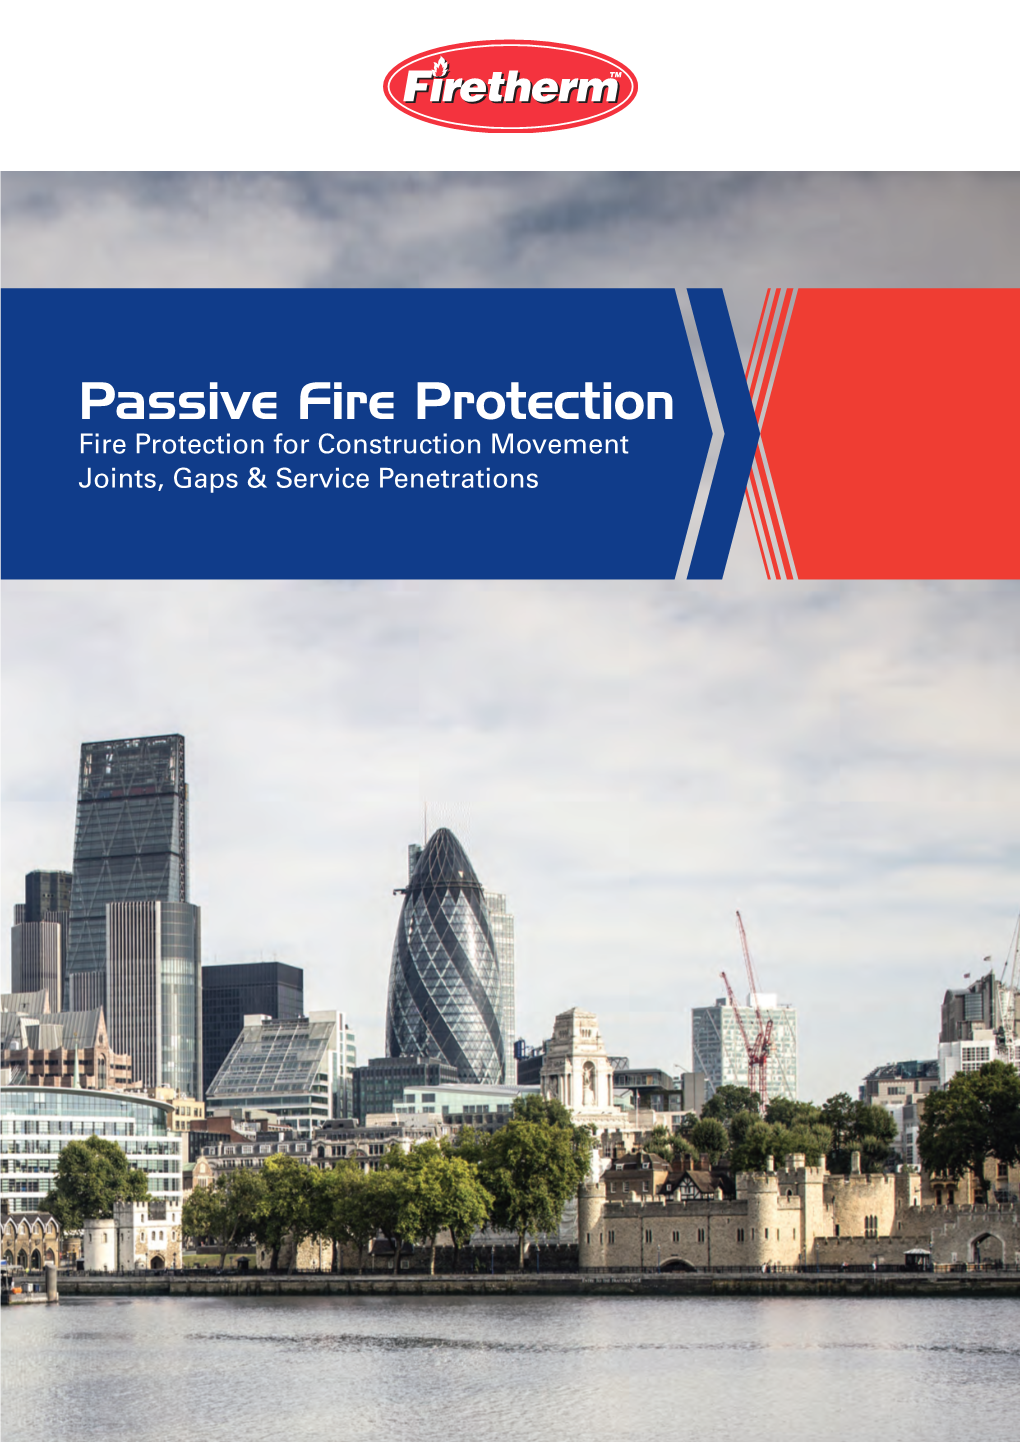 Passive Fire Protection Fire Protection for Construction Movement Joints, Gaps & Service Penetrations About Us